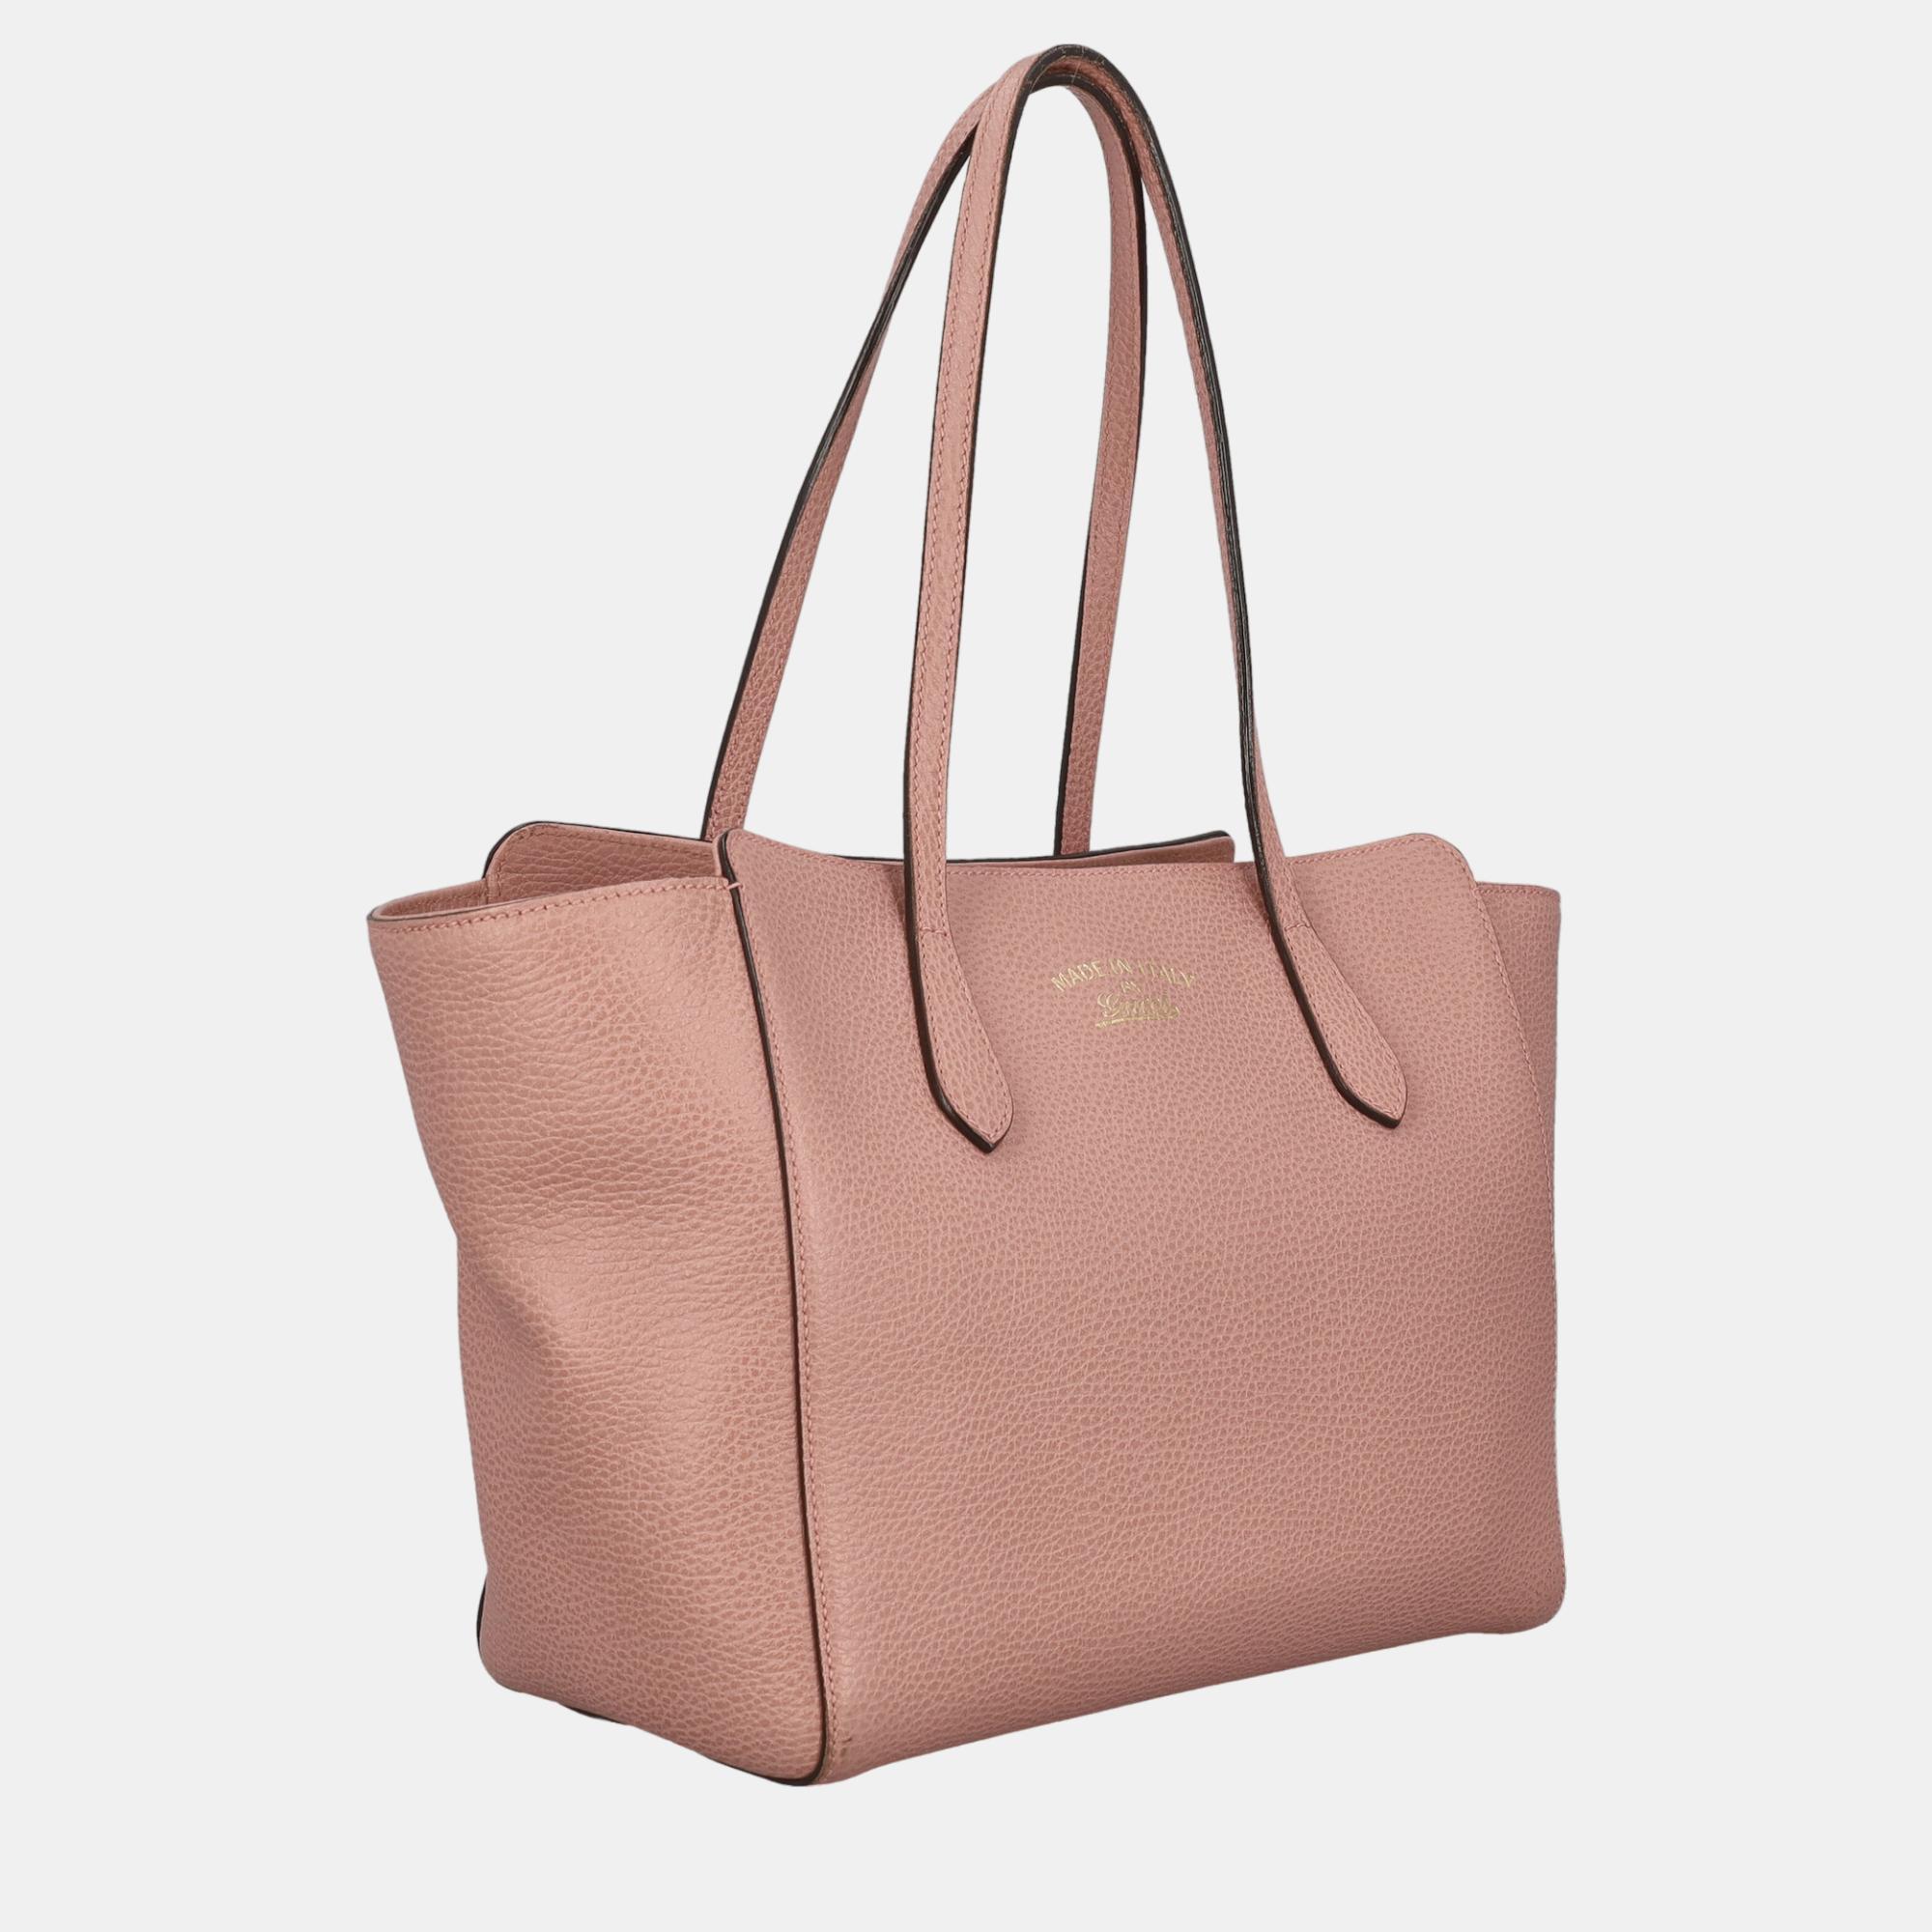 

Gucci Swing - Women's Leather Tote Bag - Pink